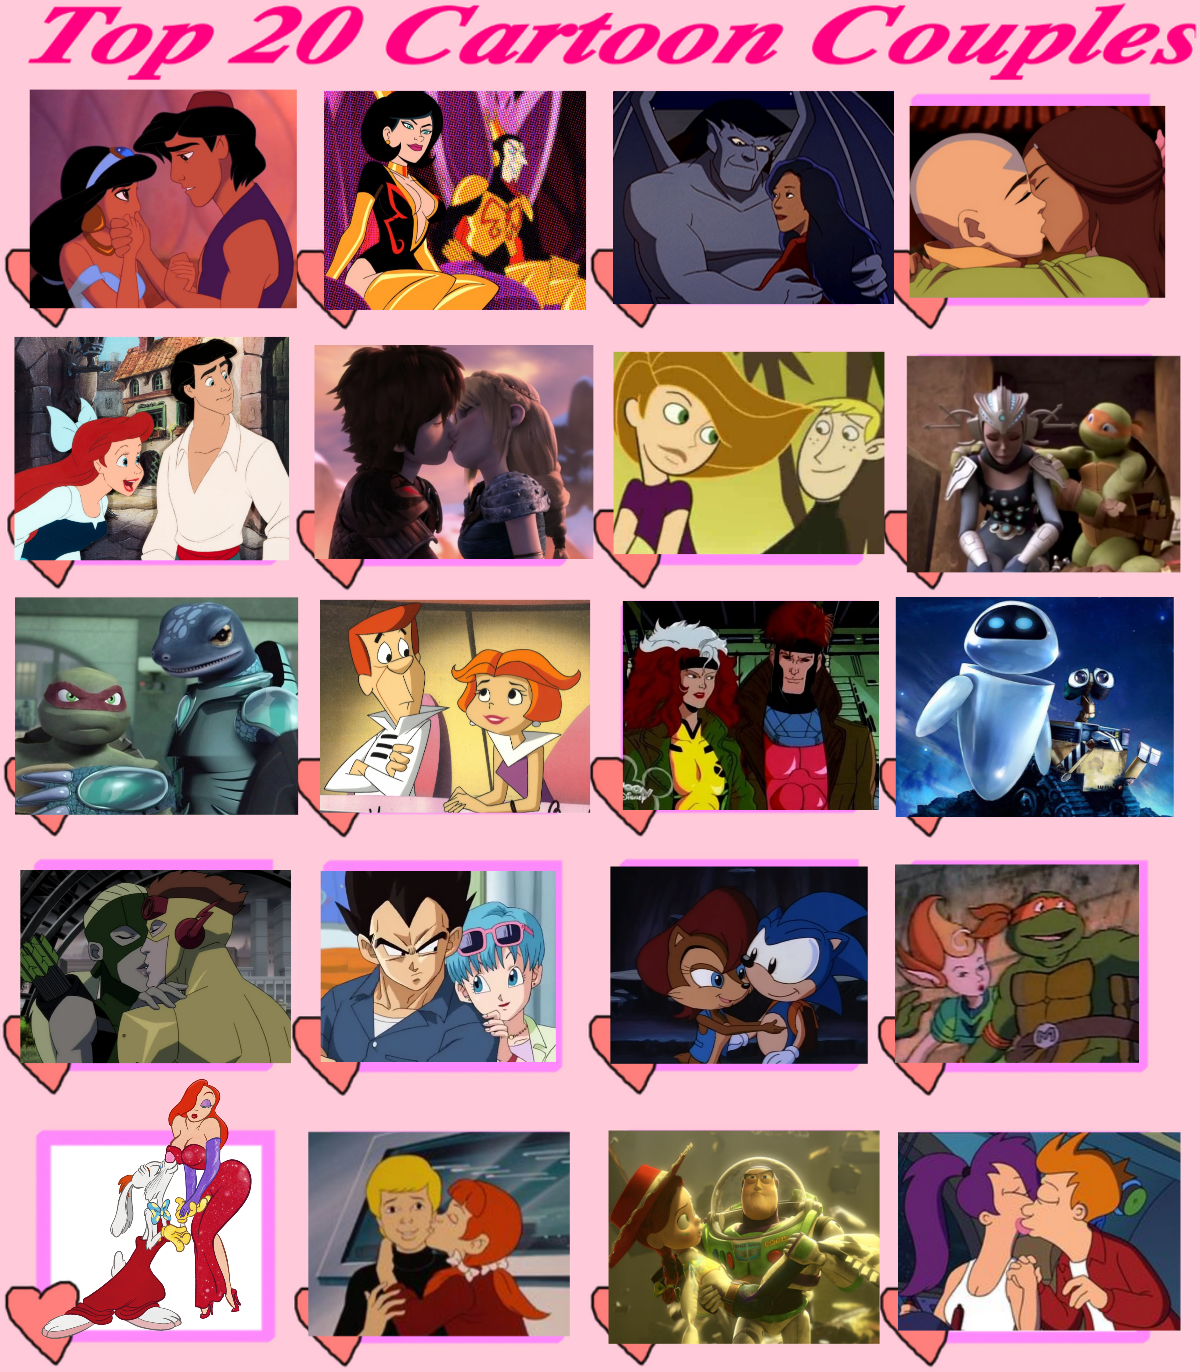 My top 20 cartoon couples by theaven on DeviantArt